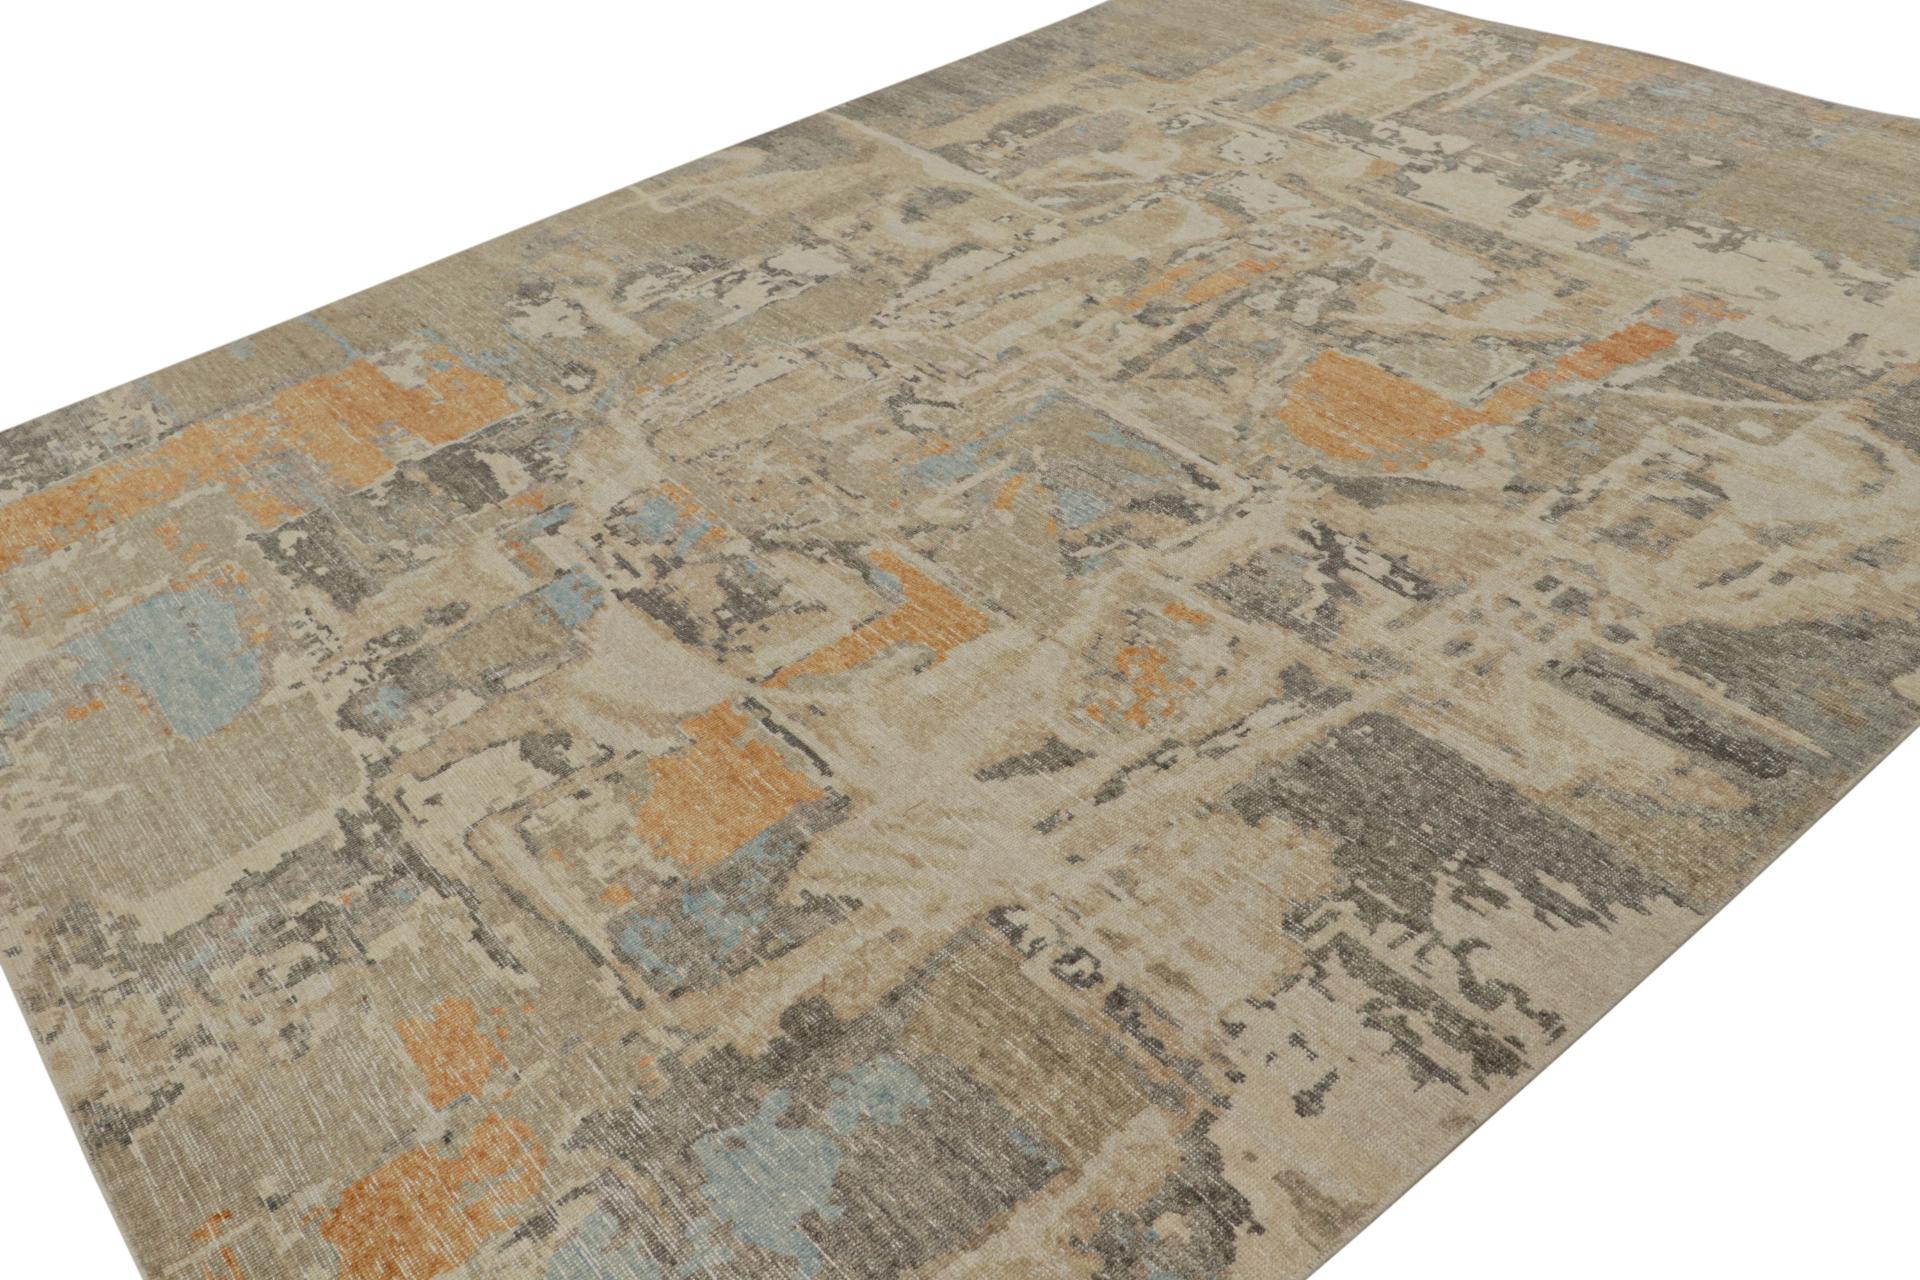 Hand-knotted in wool, this 9x12 modern rug is a new addition to the Homage Collection by Rug & Kilim.

On the Design: 

This design, as inspired by a mid-century Scandinavian rya rug design, evokes a fluid play of blue, beige/brown, and orange paint